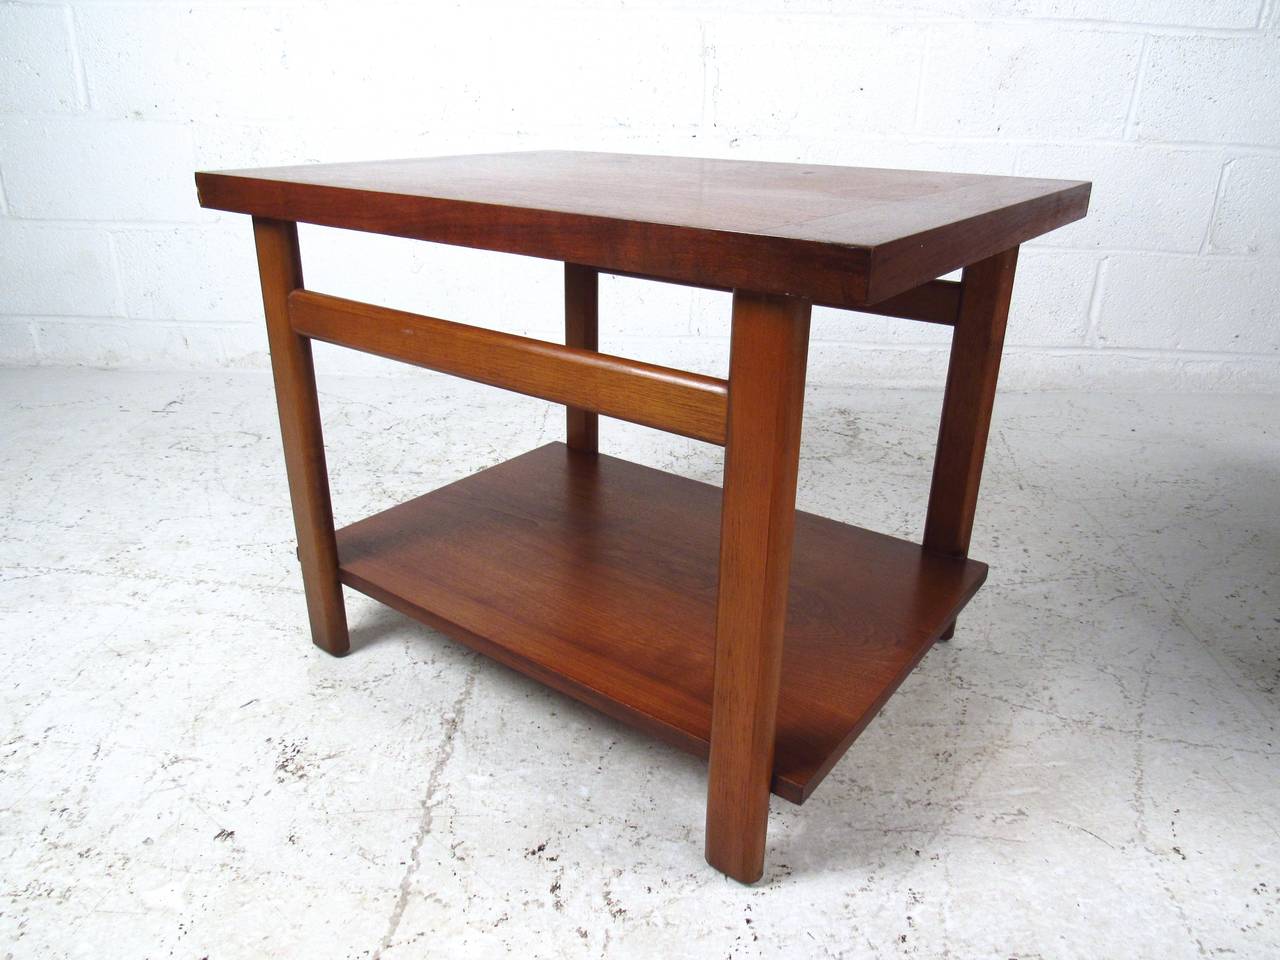 American Pair of Mid-Century Modern Walnut End Tables by Lane